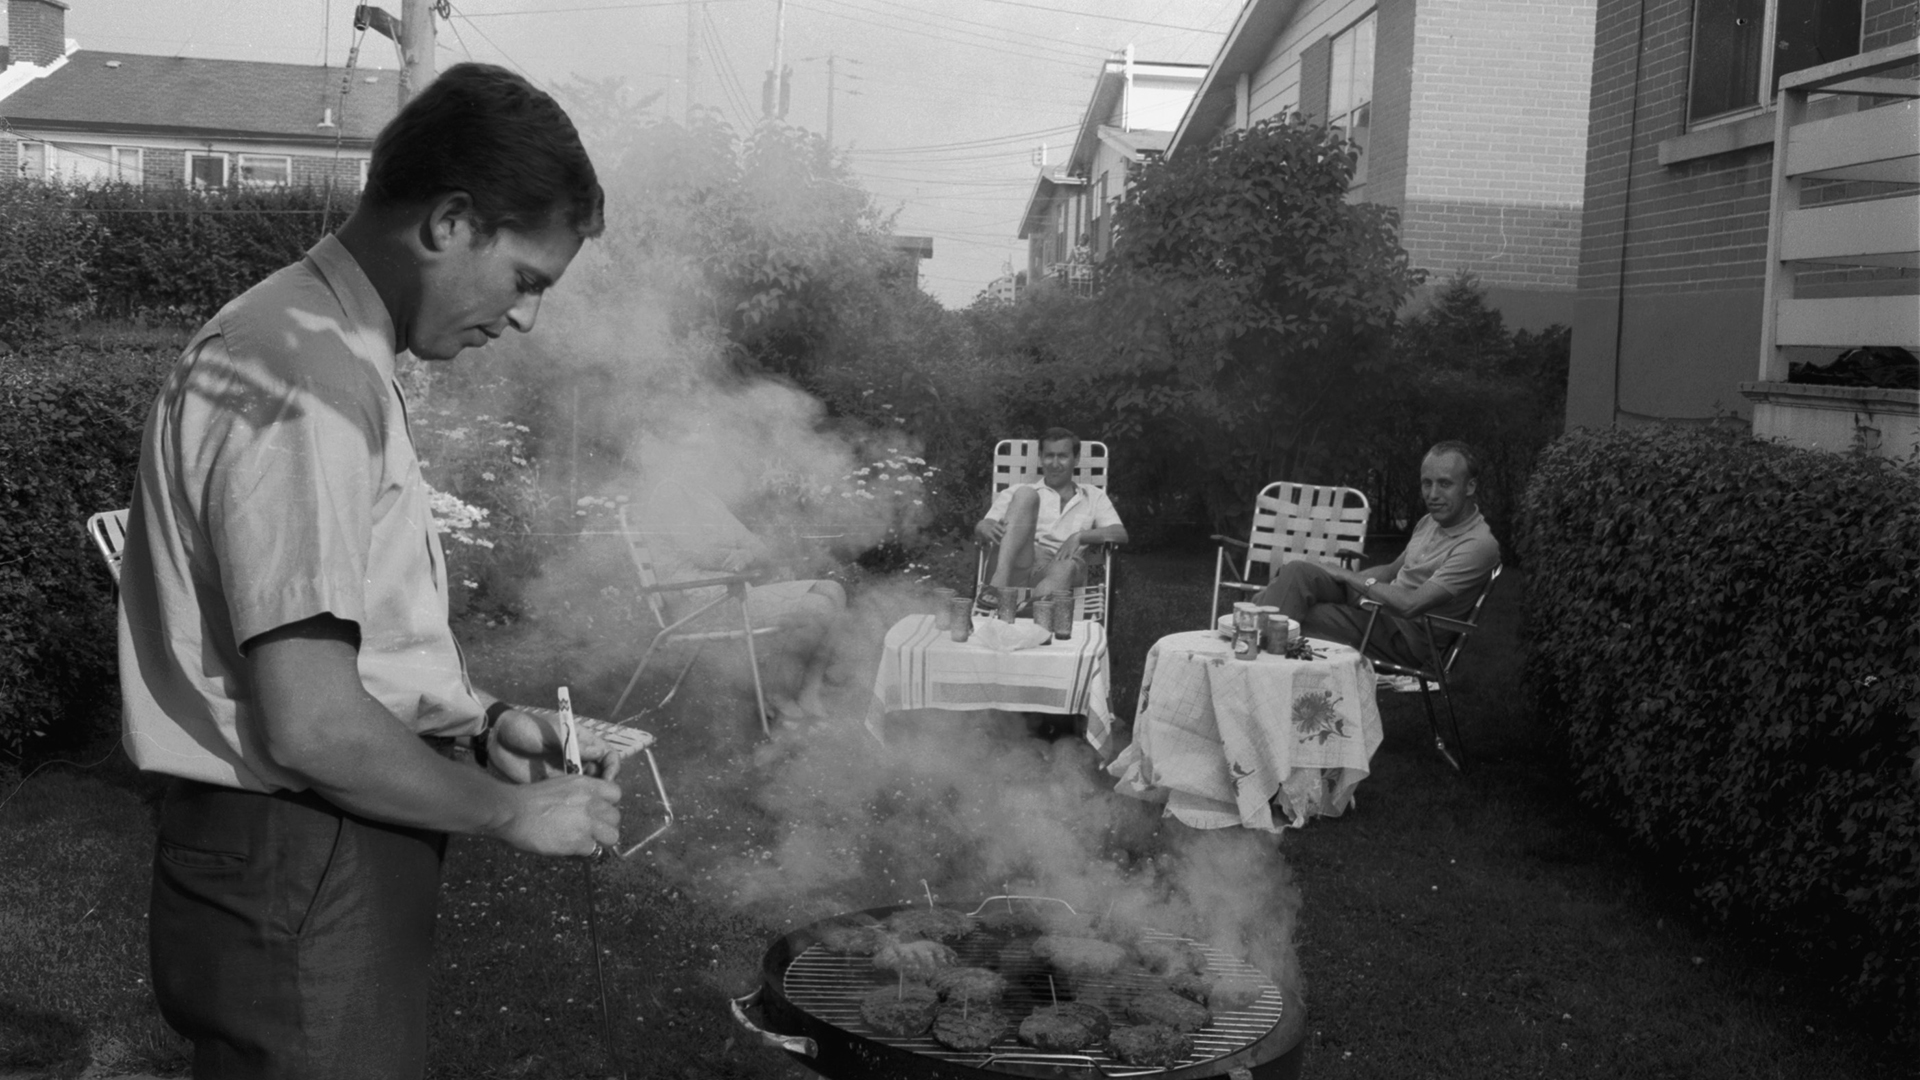 Canada - Montreal circa 1959, man grilling, BBQ with the family